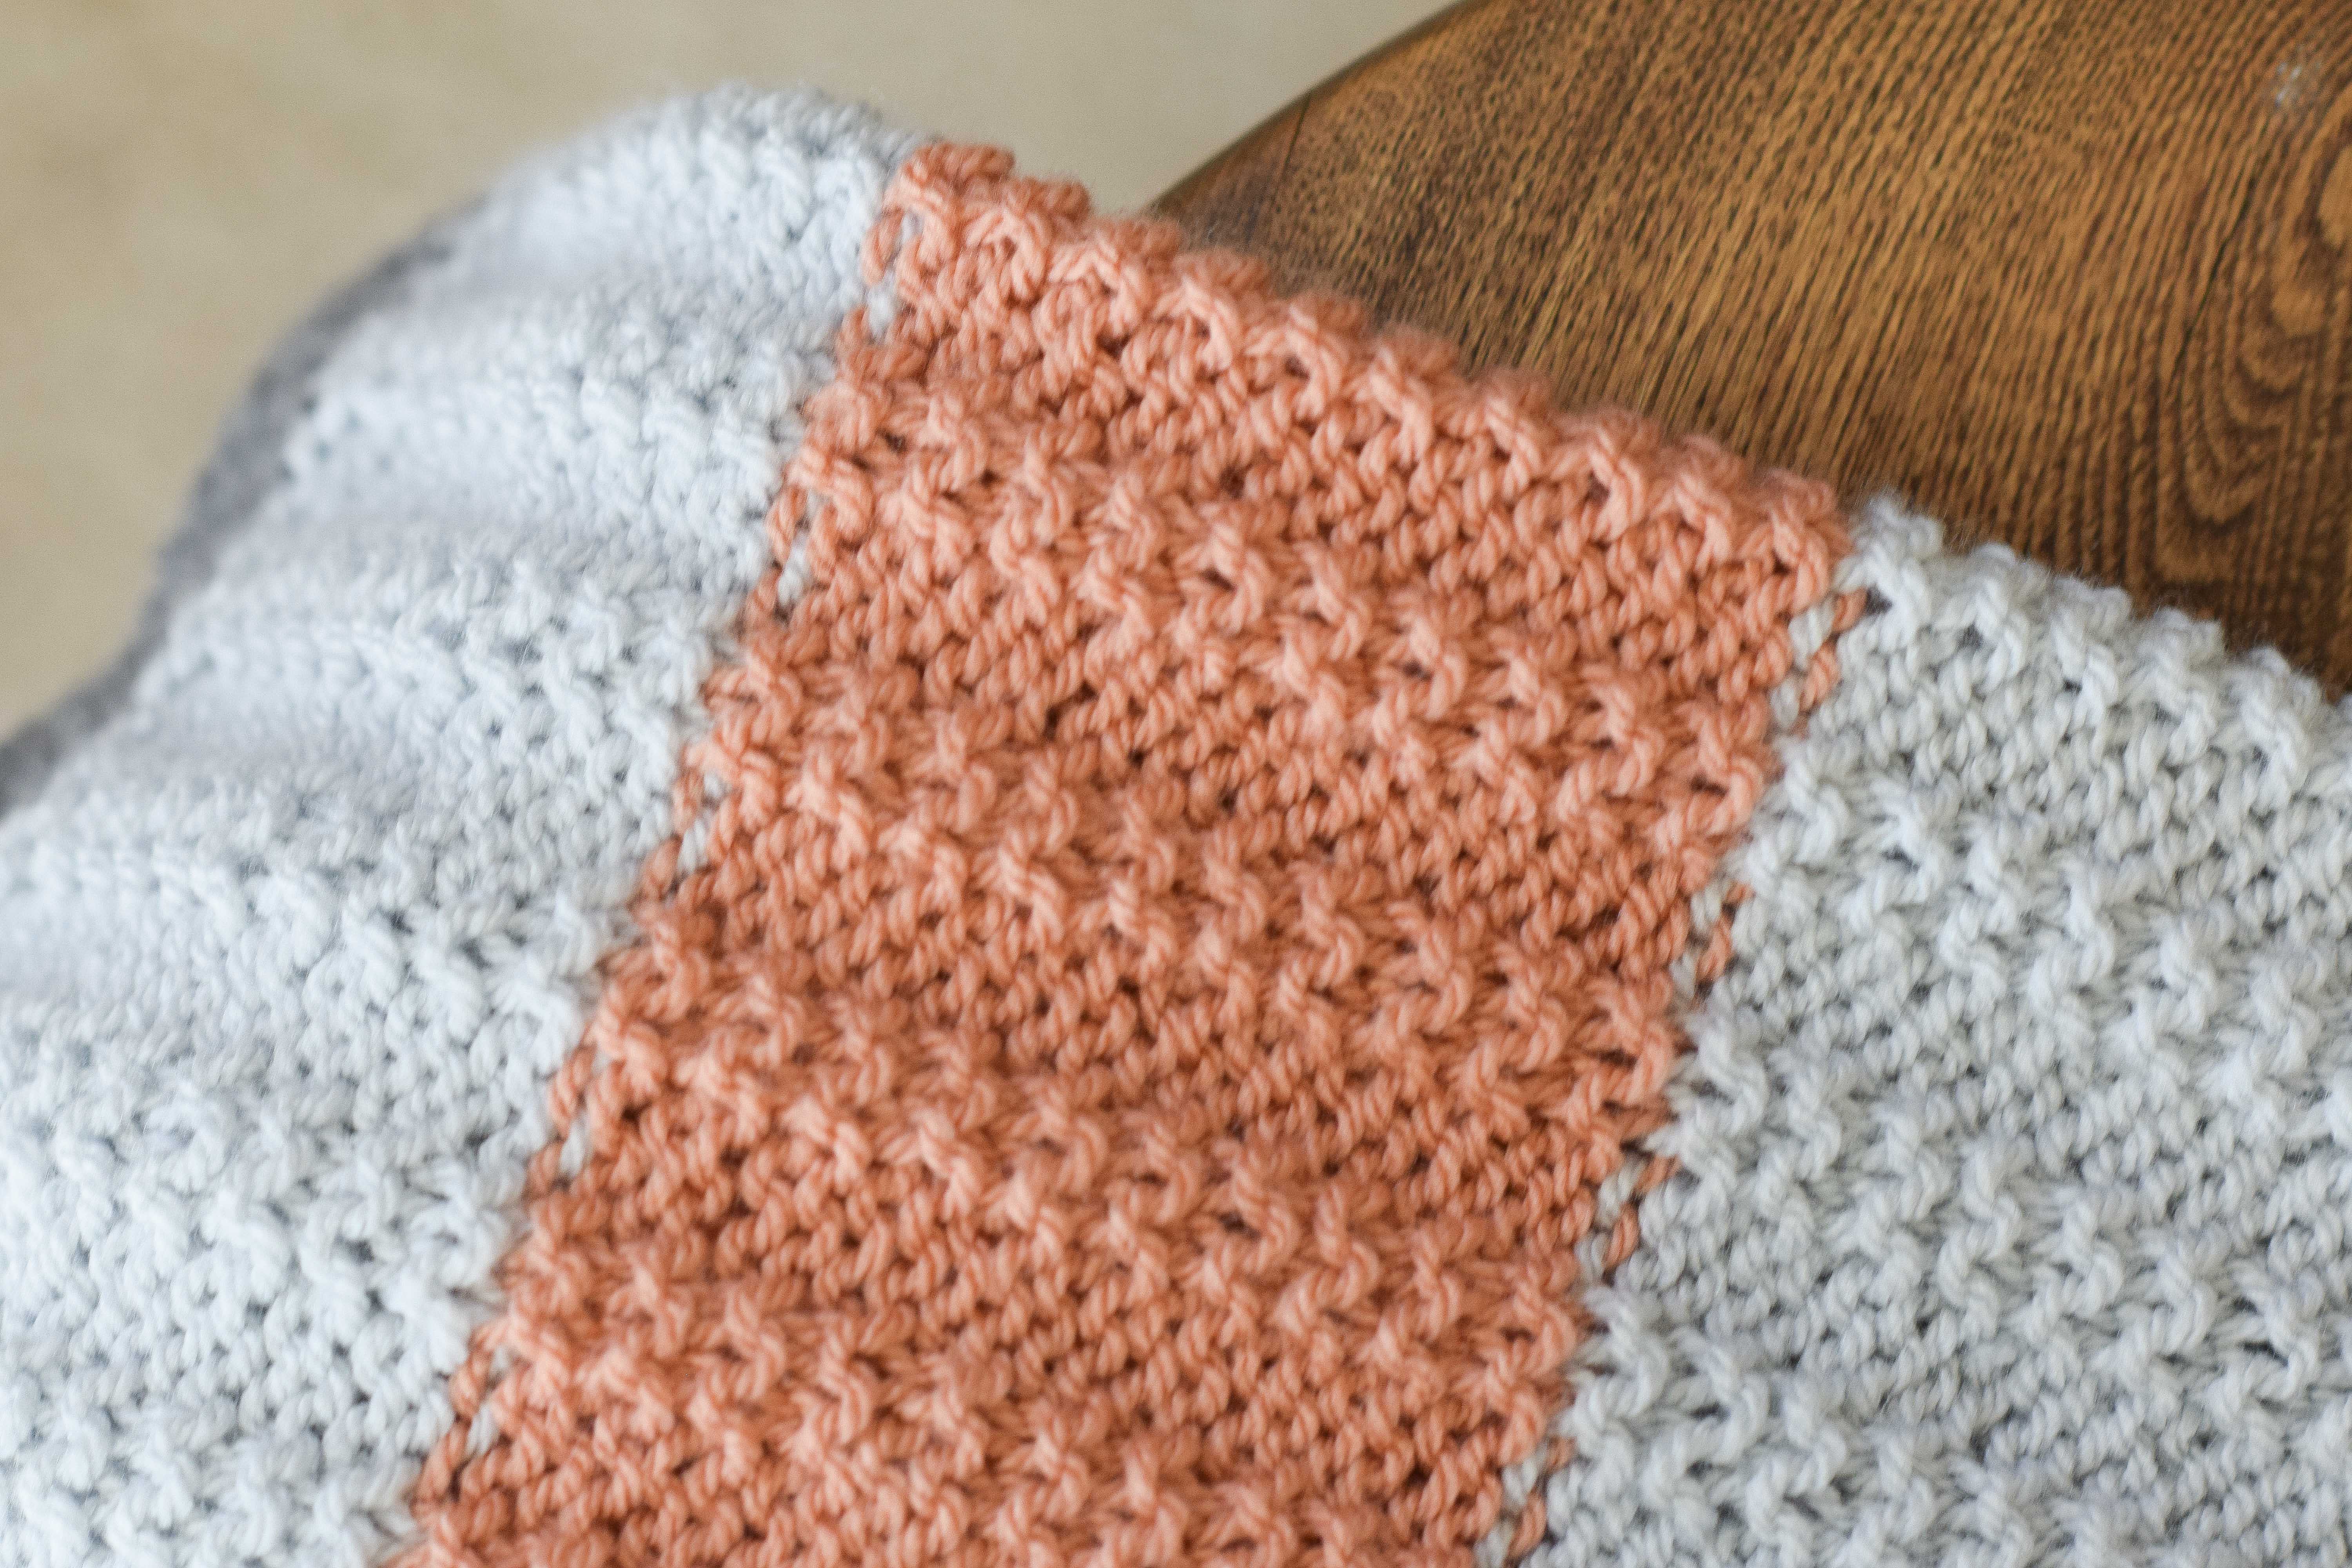 27 Easy and Free Baby Blanket Knitting Patterns